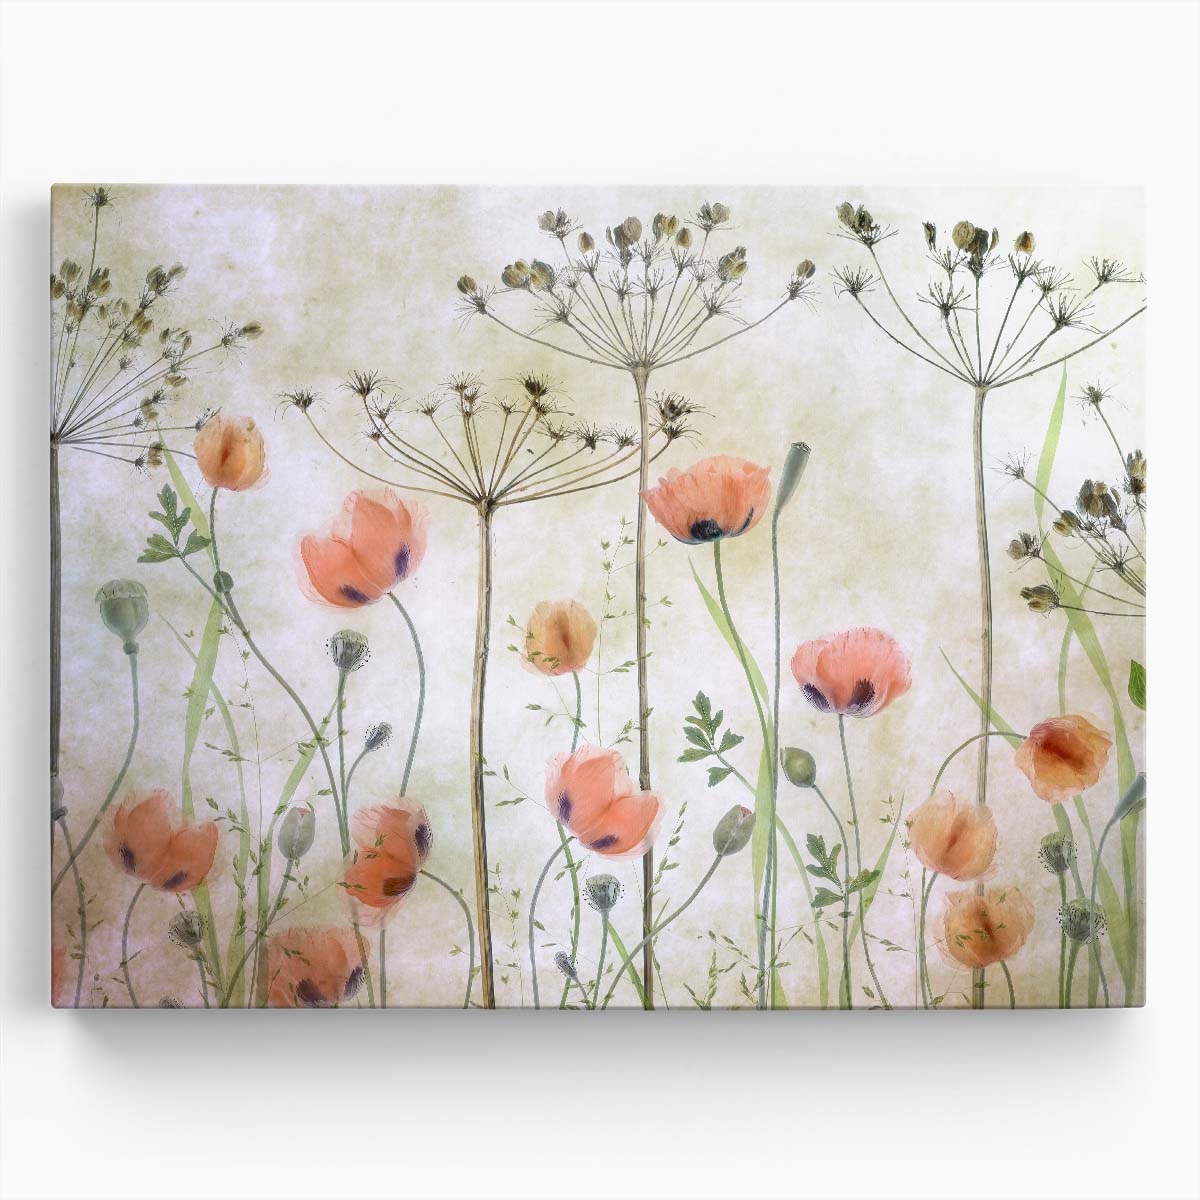 Poppy Meadow Floral & Botanical Still Life Photography Wall Art by Luxuriance Designs. Made in USA.